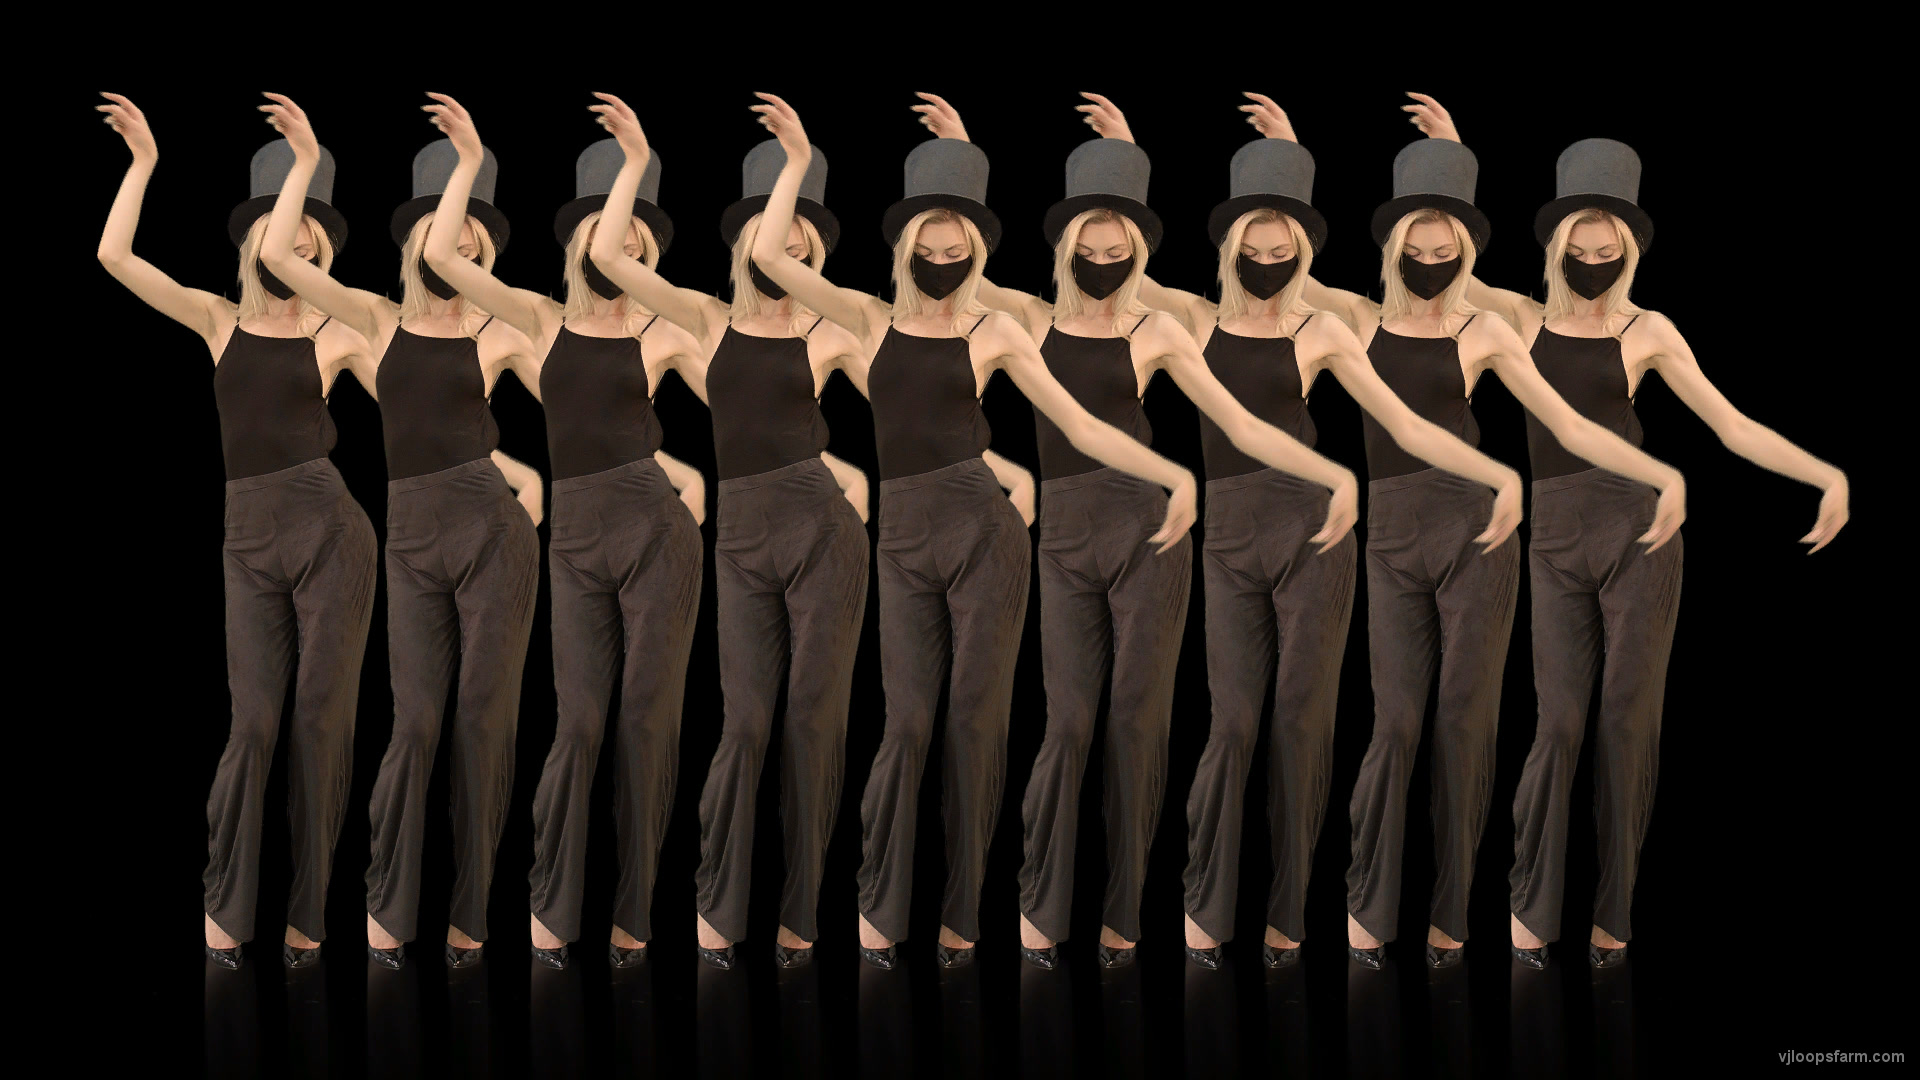 Beauty Blonde Girl in Covid-19 black mask dancing isolated on black background 4K Video VJ Footage